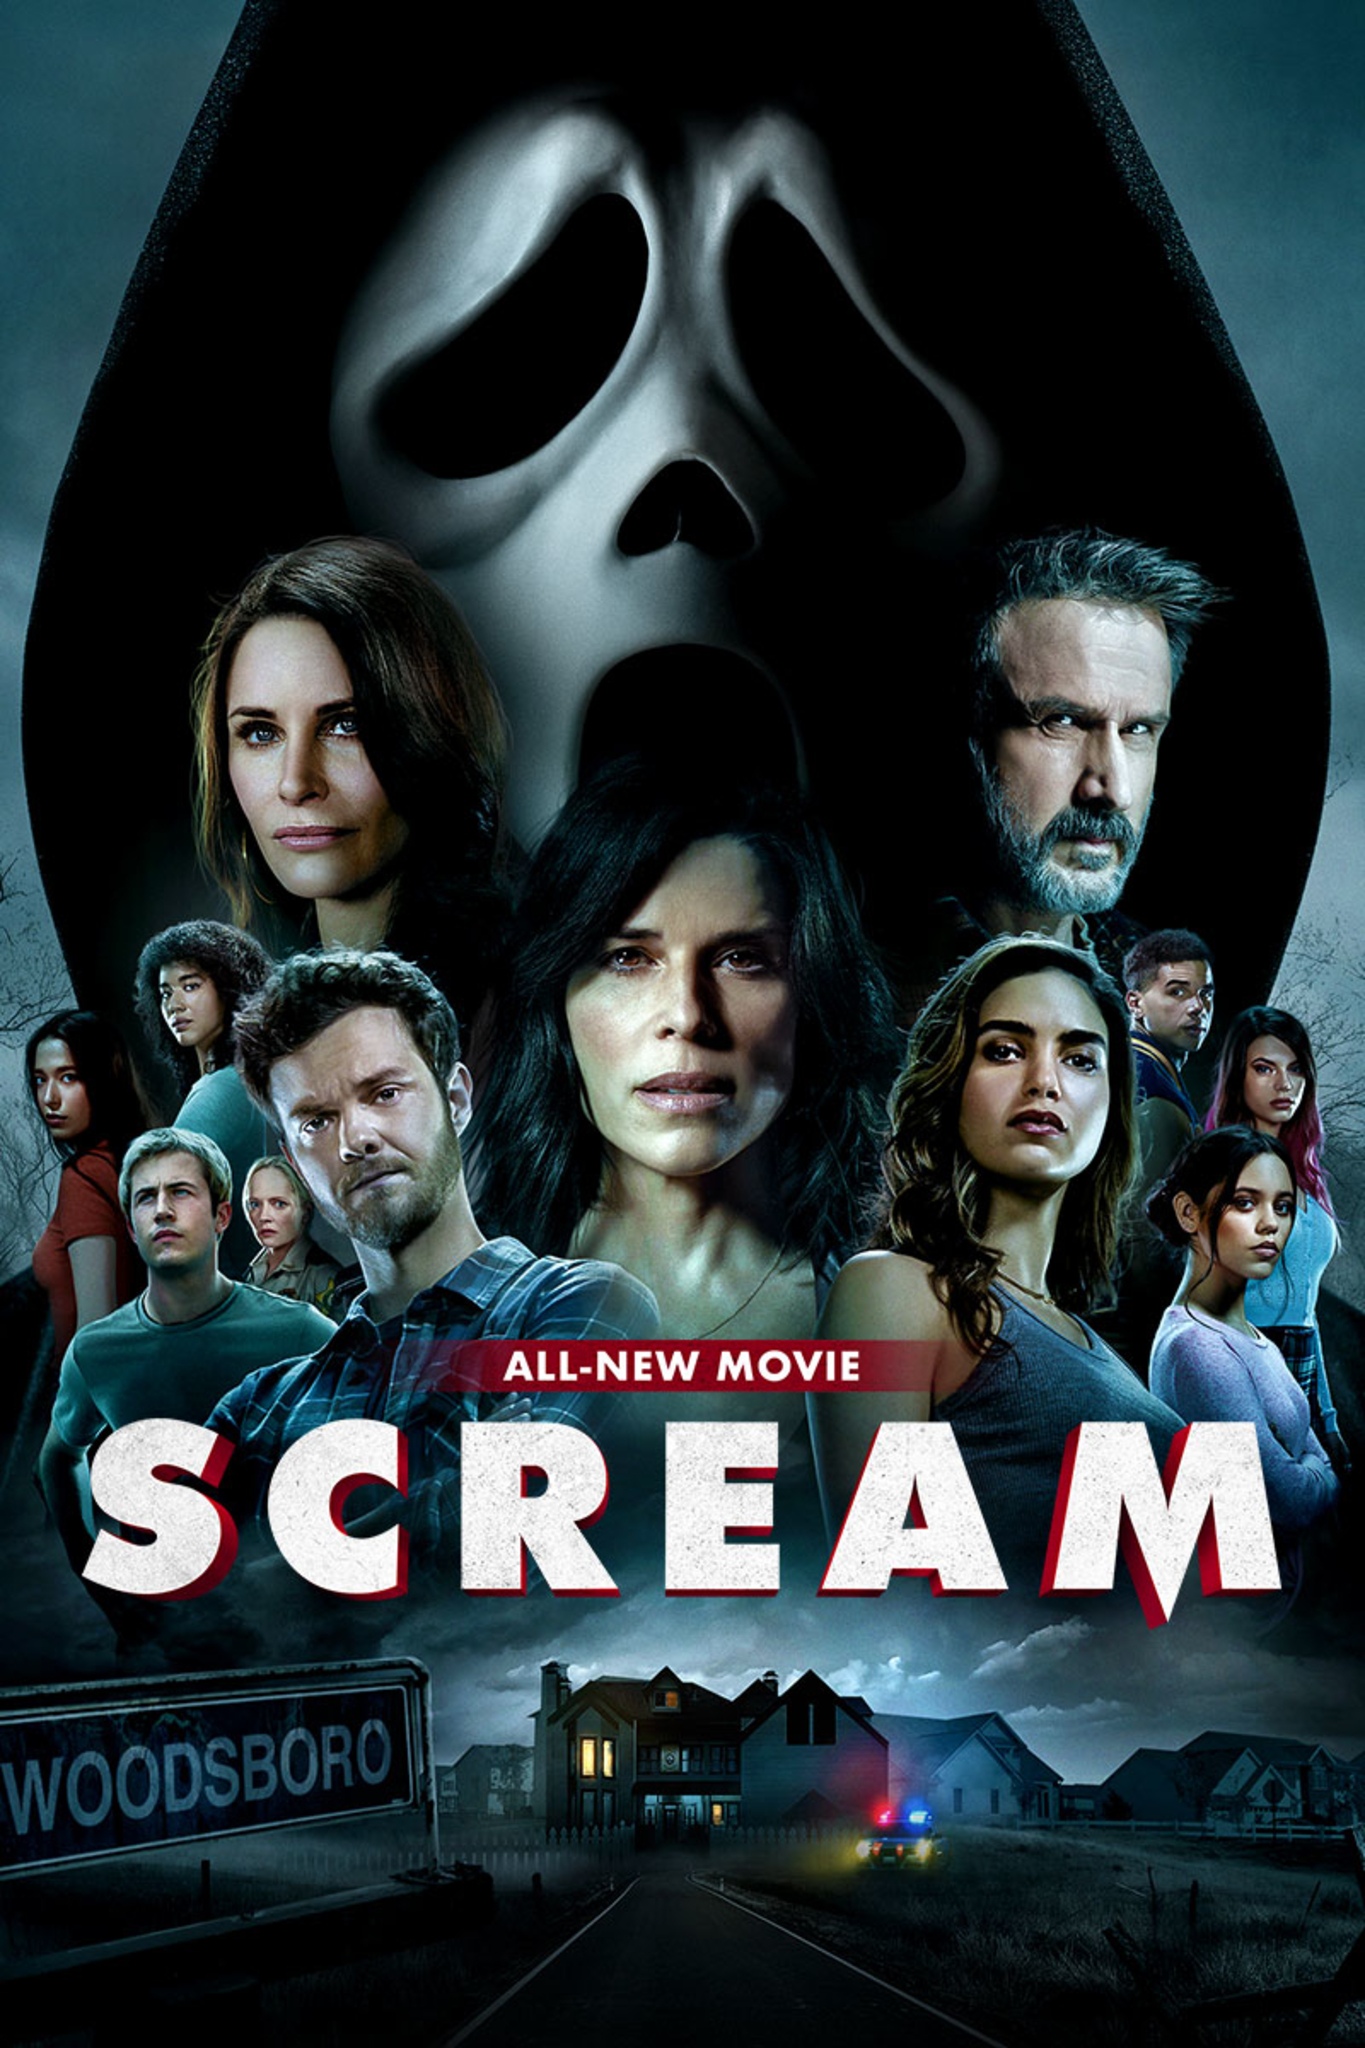 Scream (2022) digital download and blu-ray release